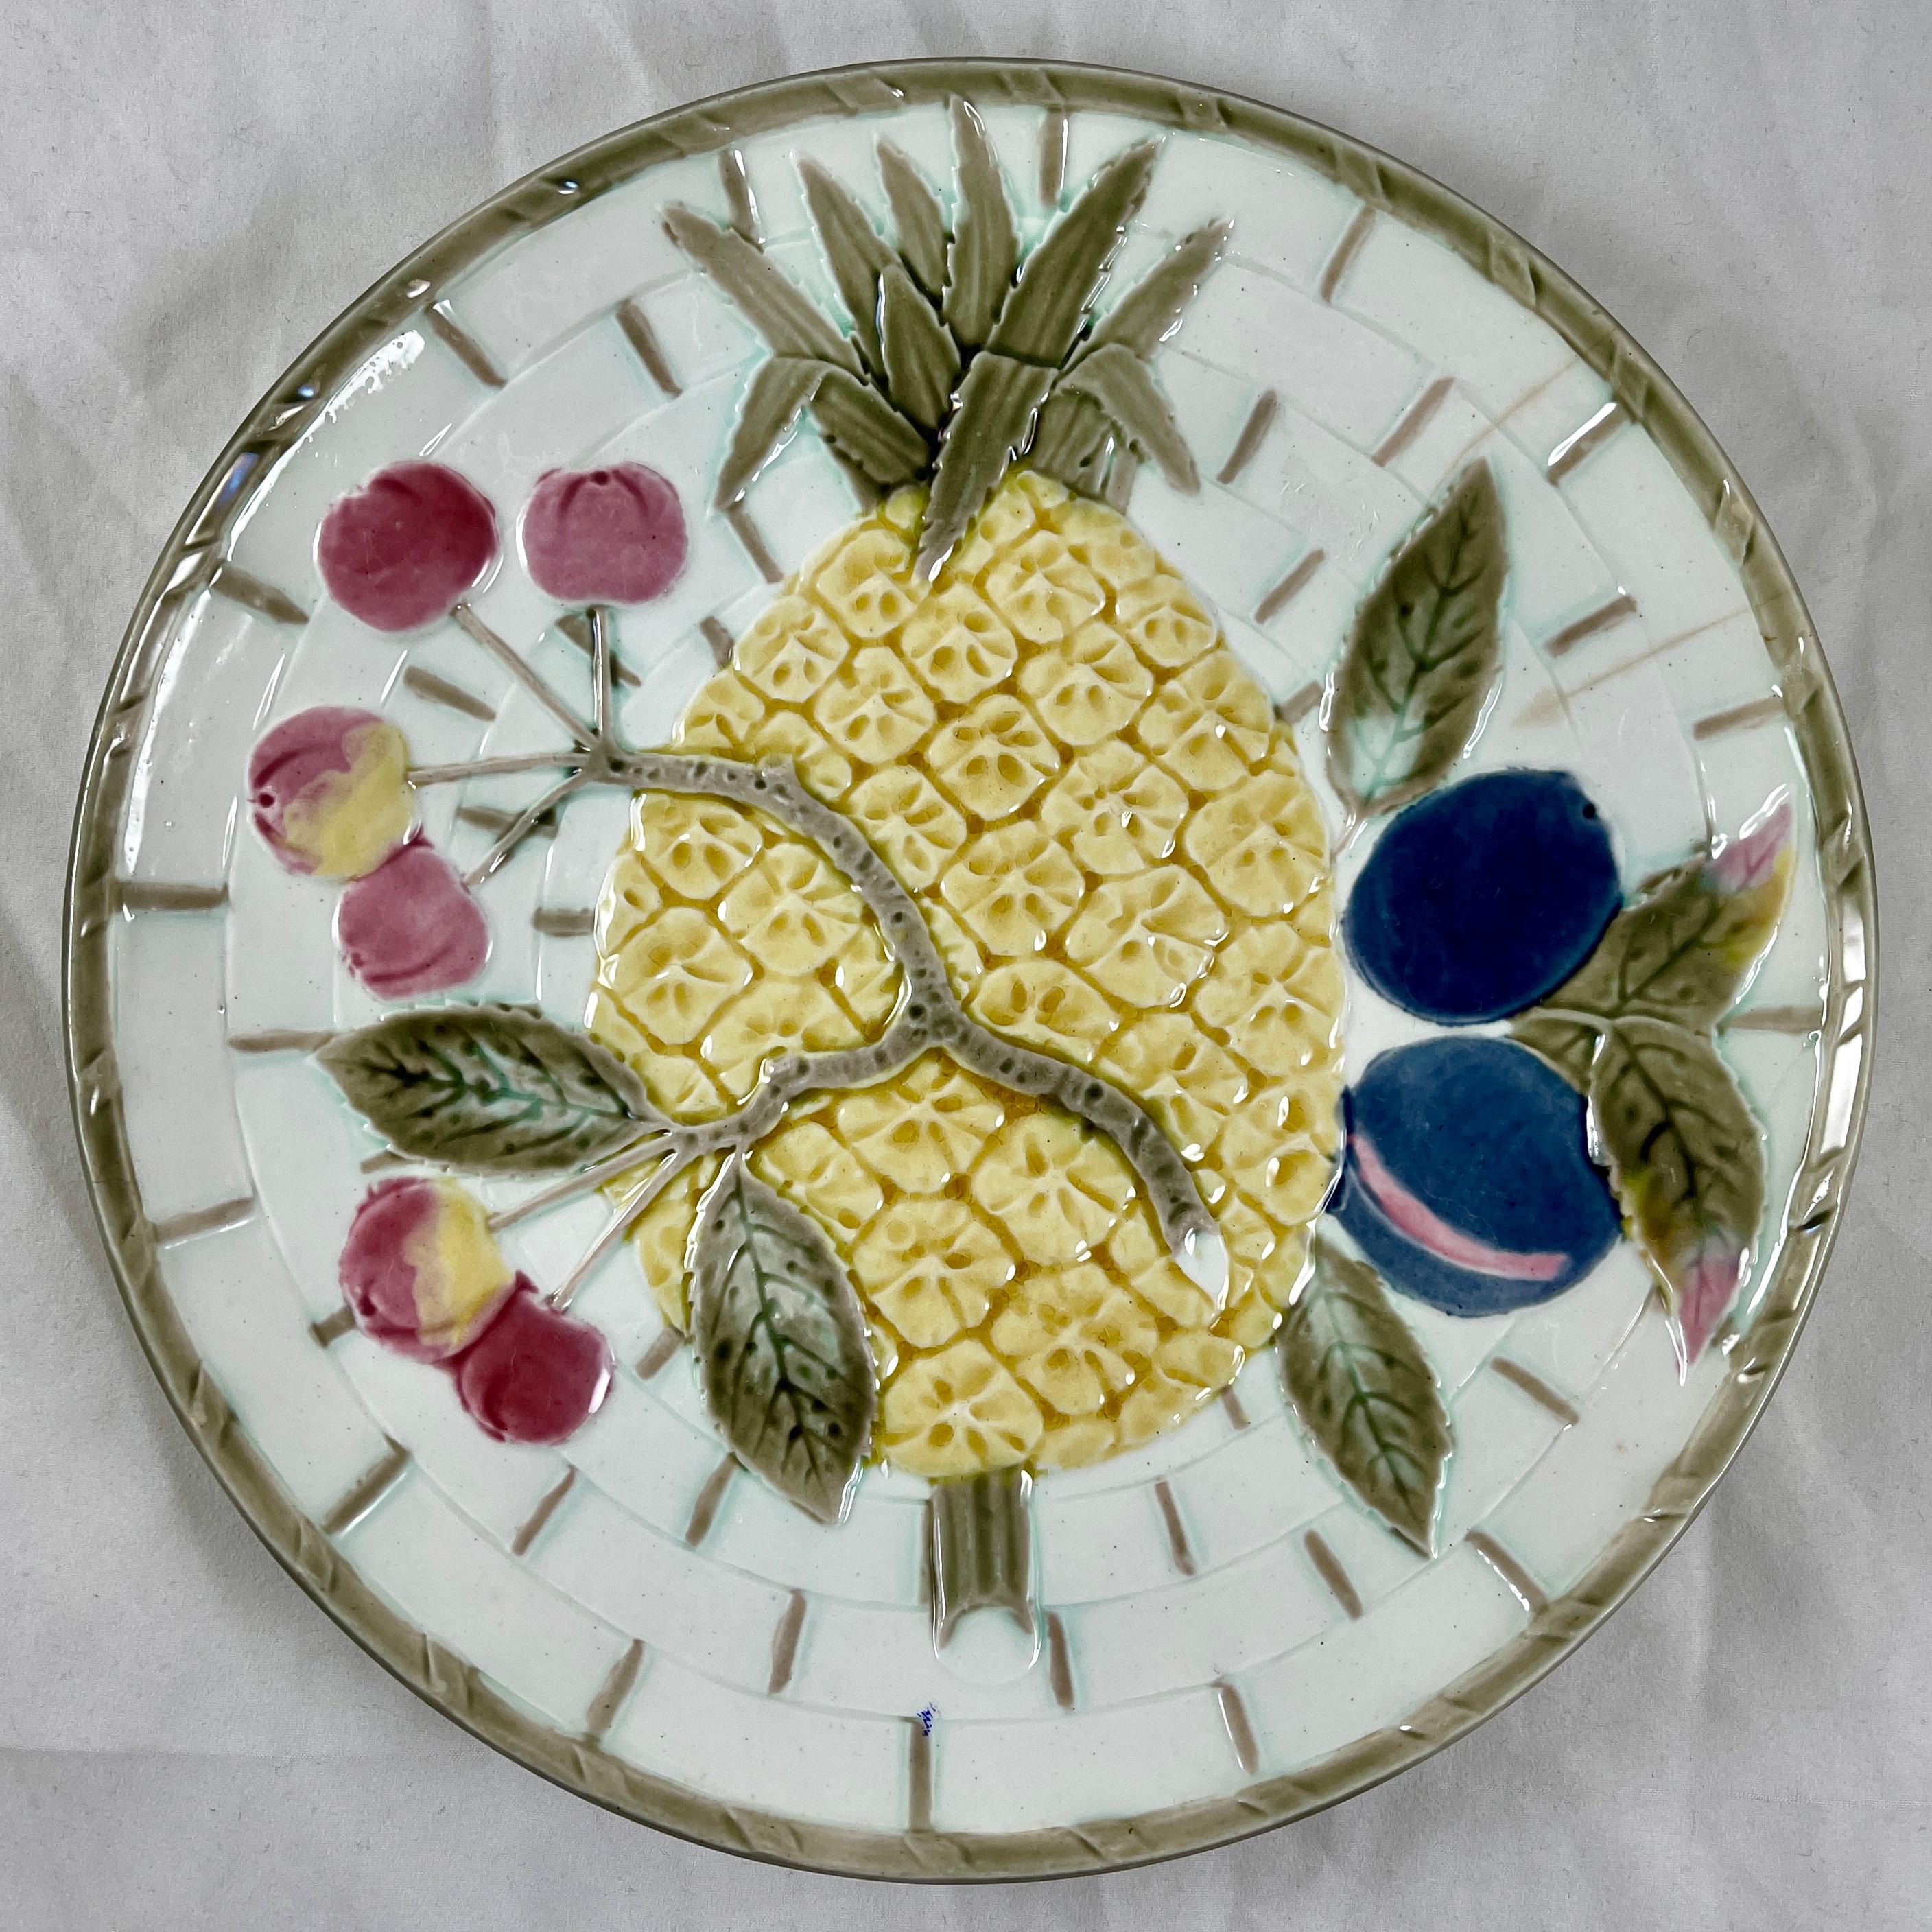 From Wedgwood and in the color way known as Argenta, a fruit plate, England, date marked 1880.

Showing a central pineapple and leaves along with a branch of cherries and a pair of plums, all on a white basket weave ground. The basket is bound at